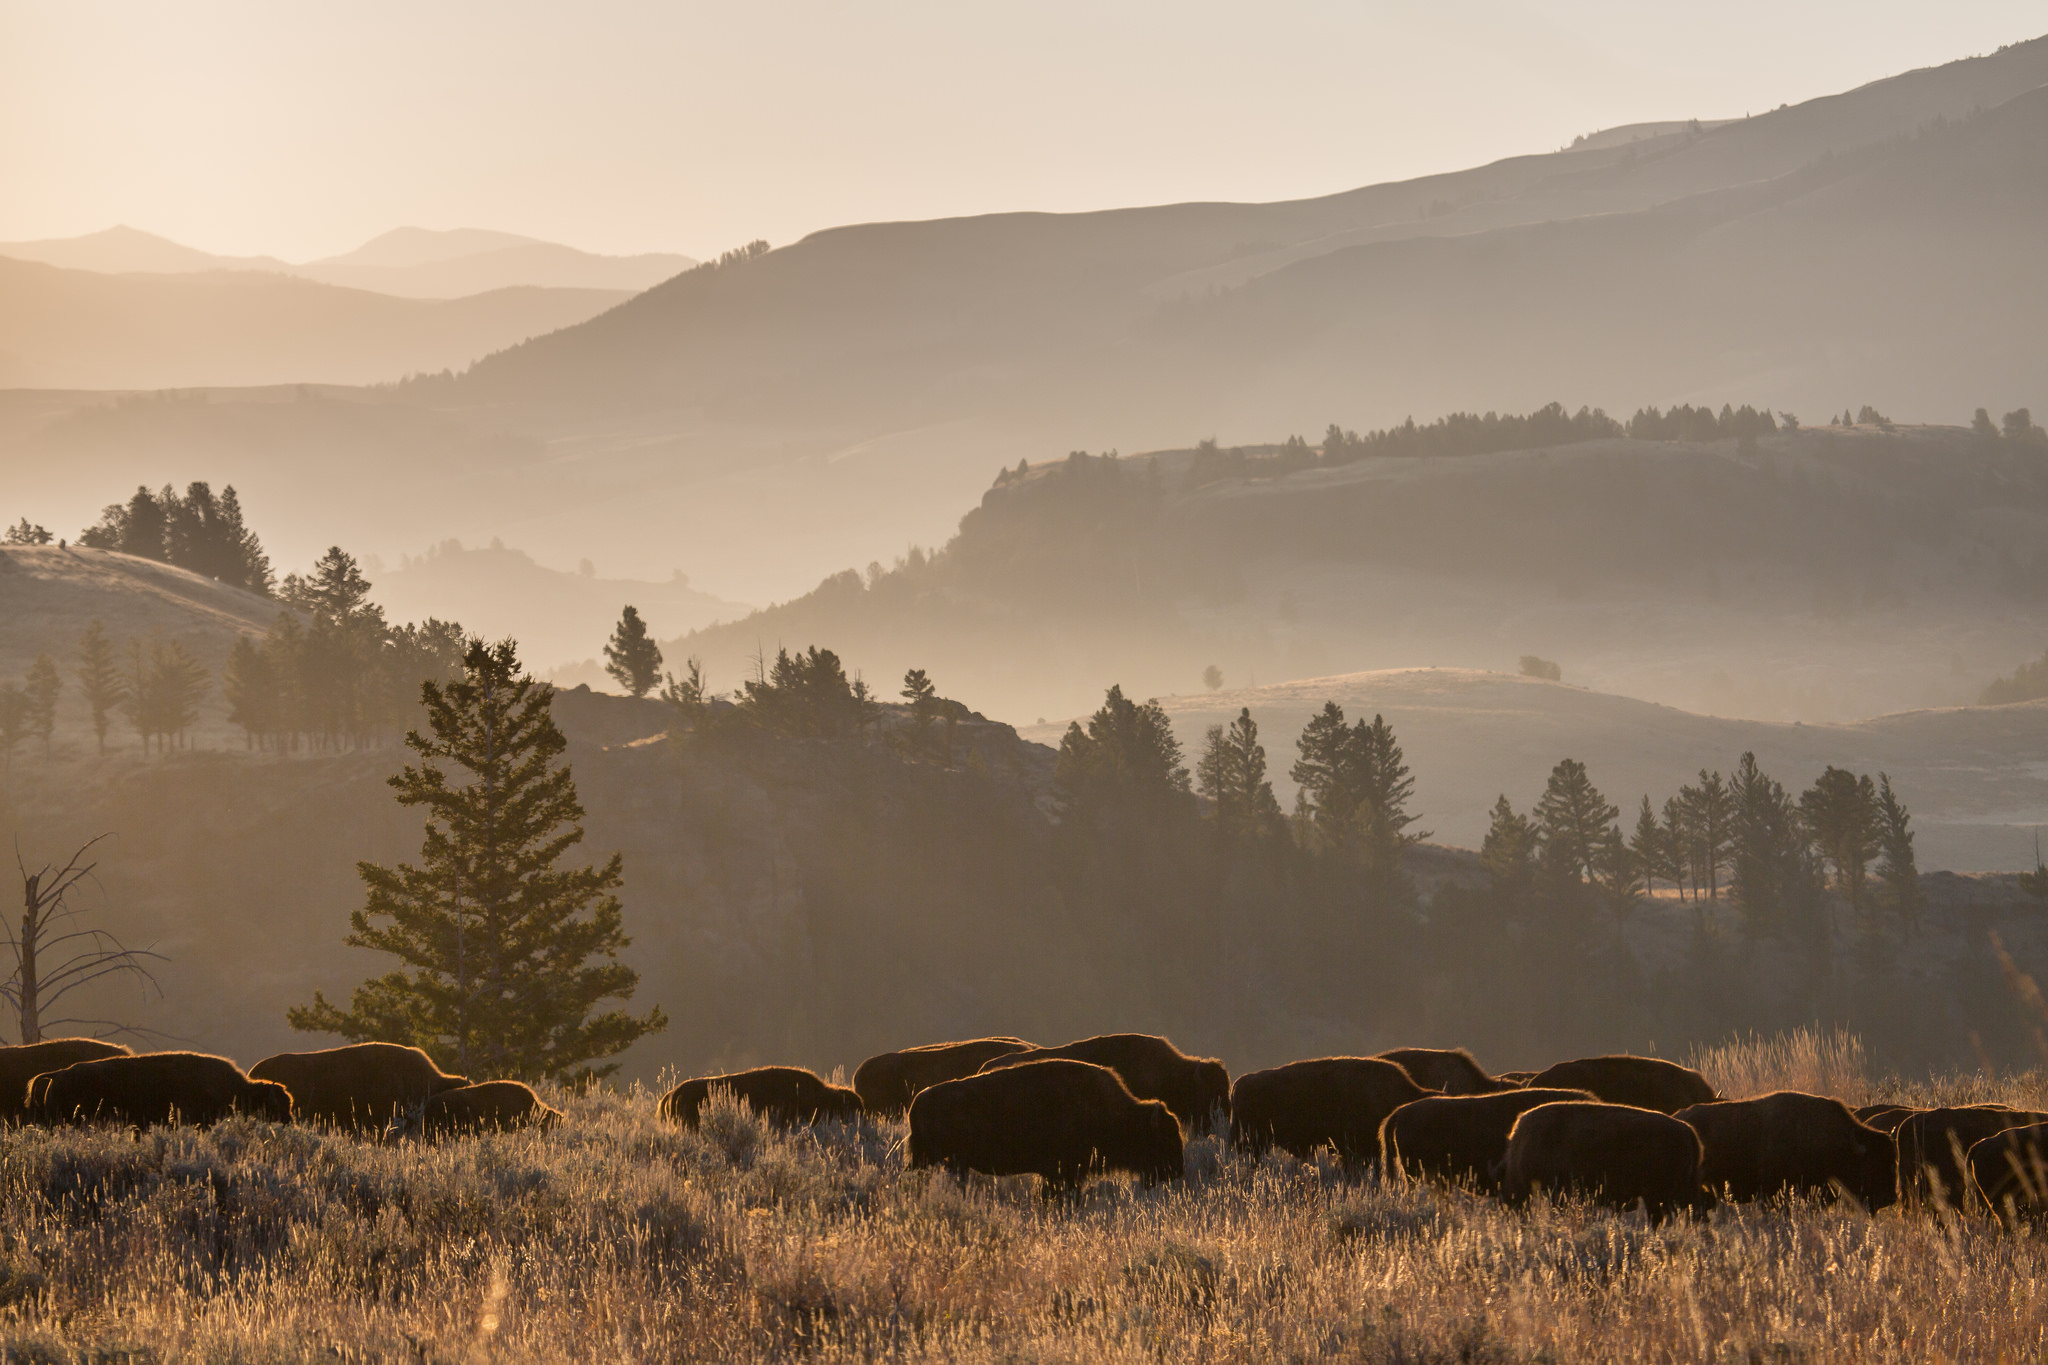 Bison grazing in a misty valley